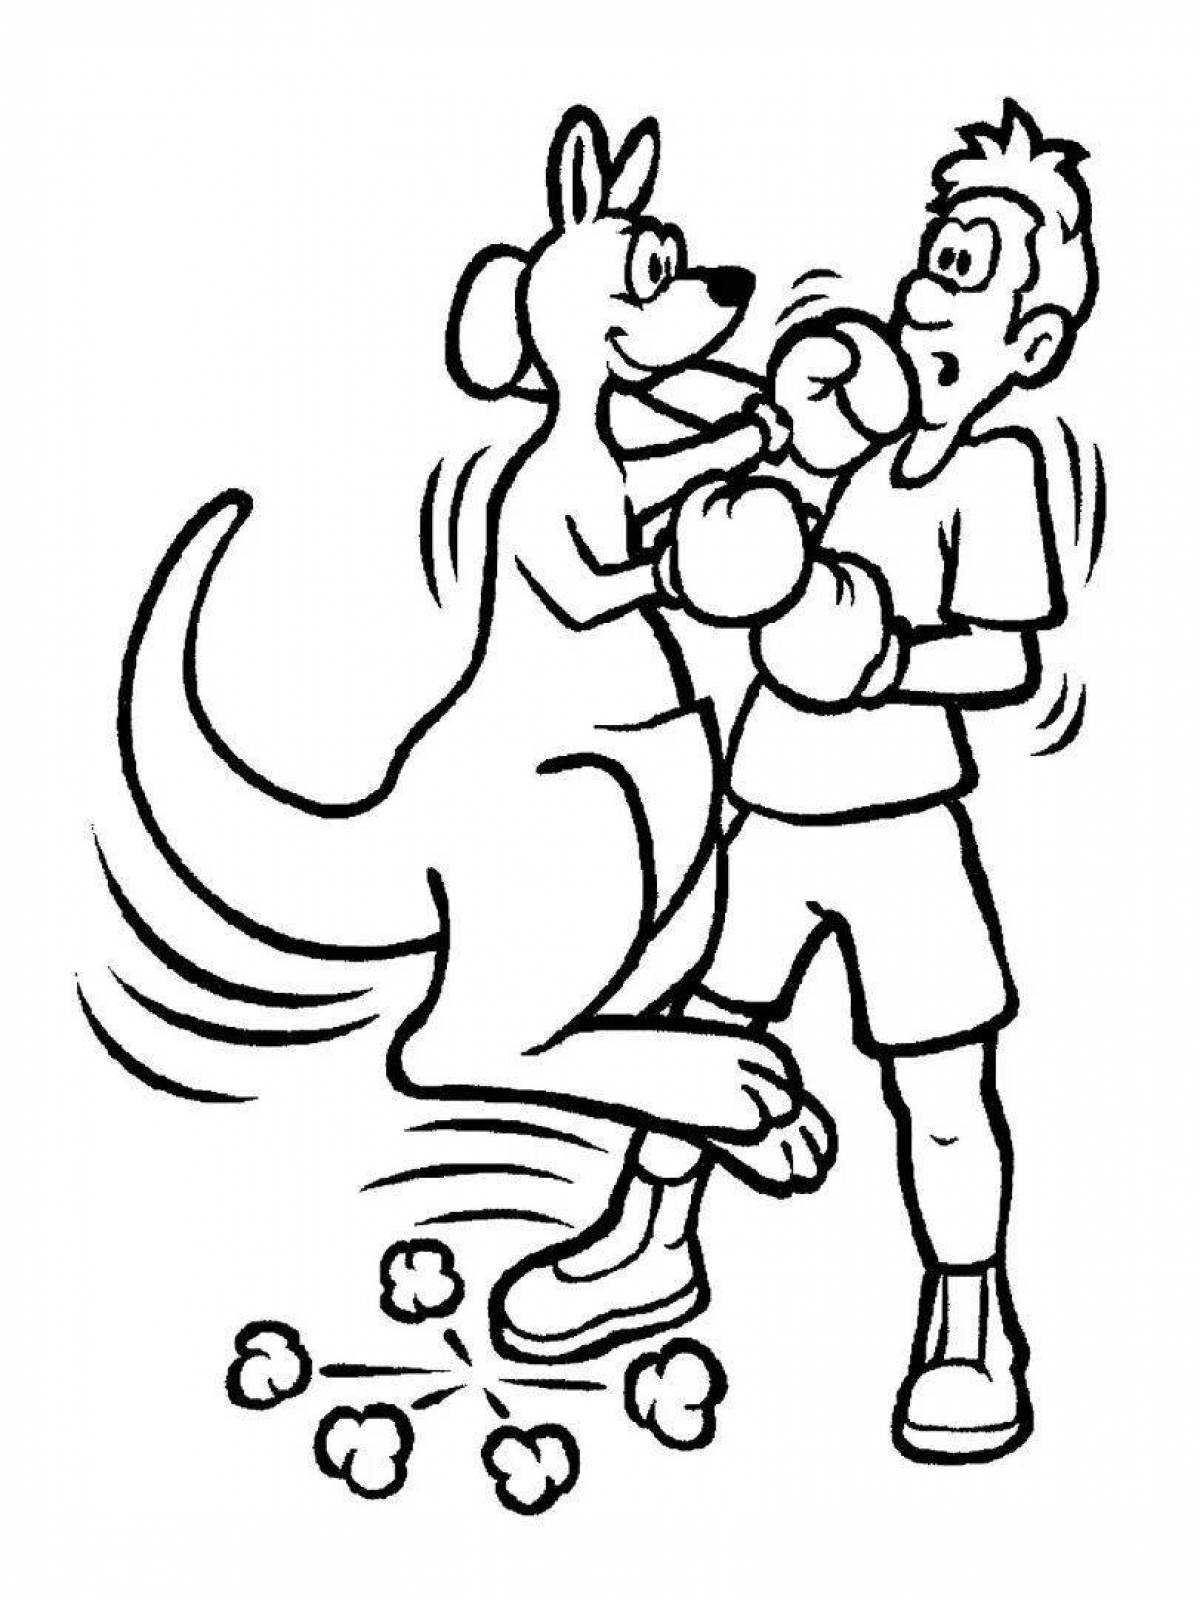 Fun boxing coloring book for kids